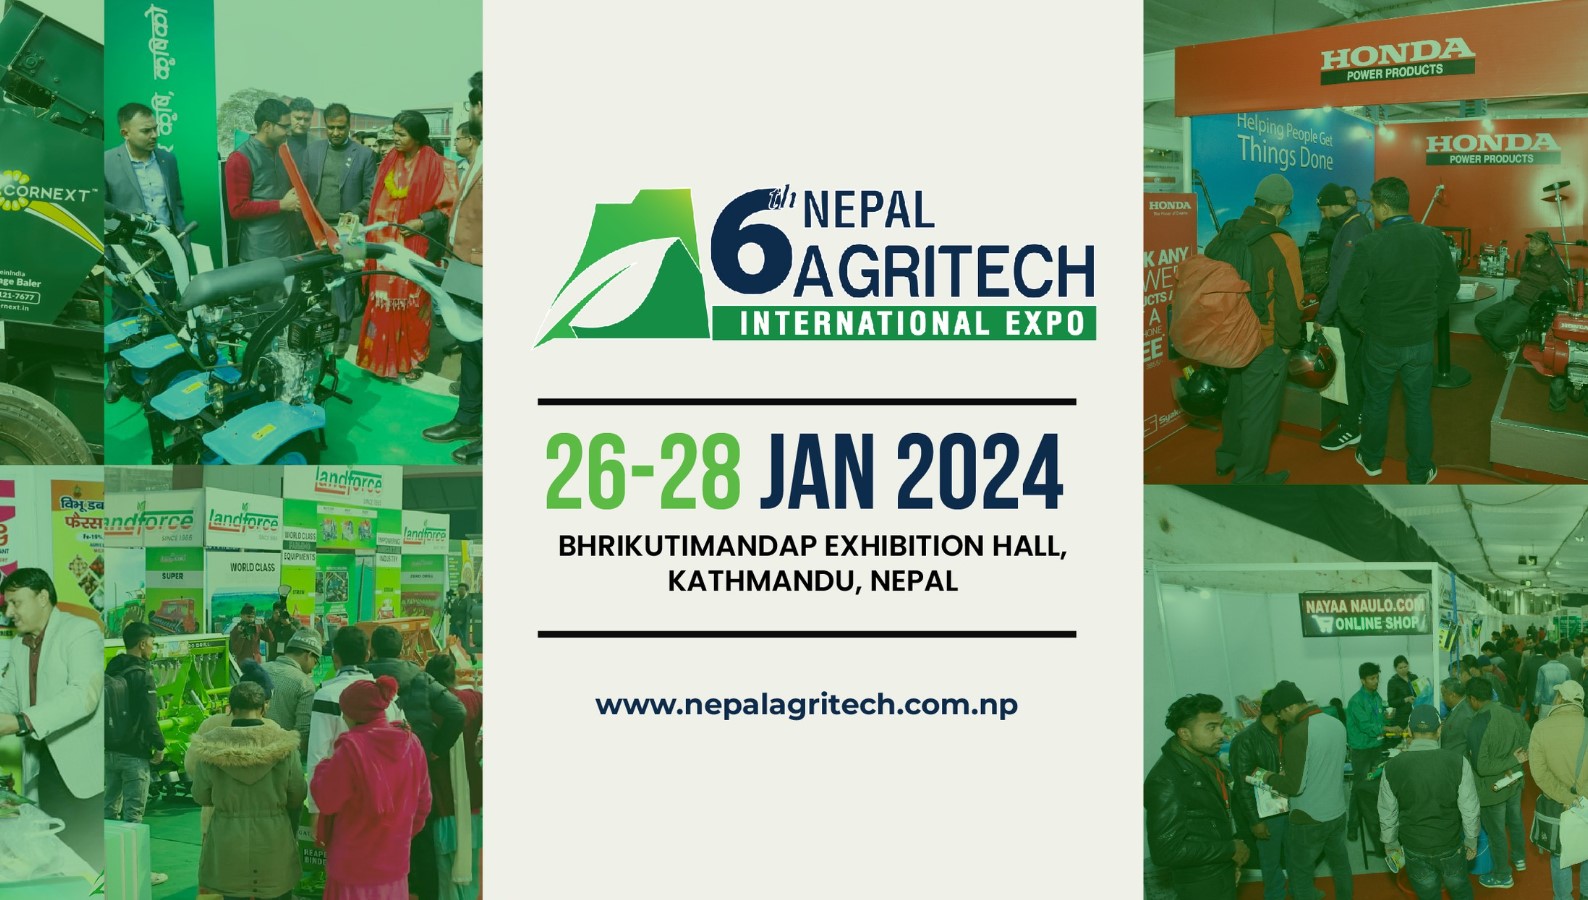 Nepal Agritech International Expo 2024 to be Held from 26th Feb